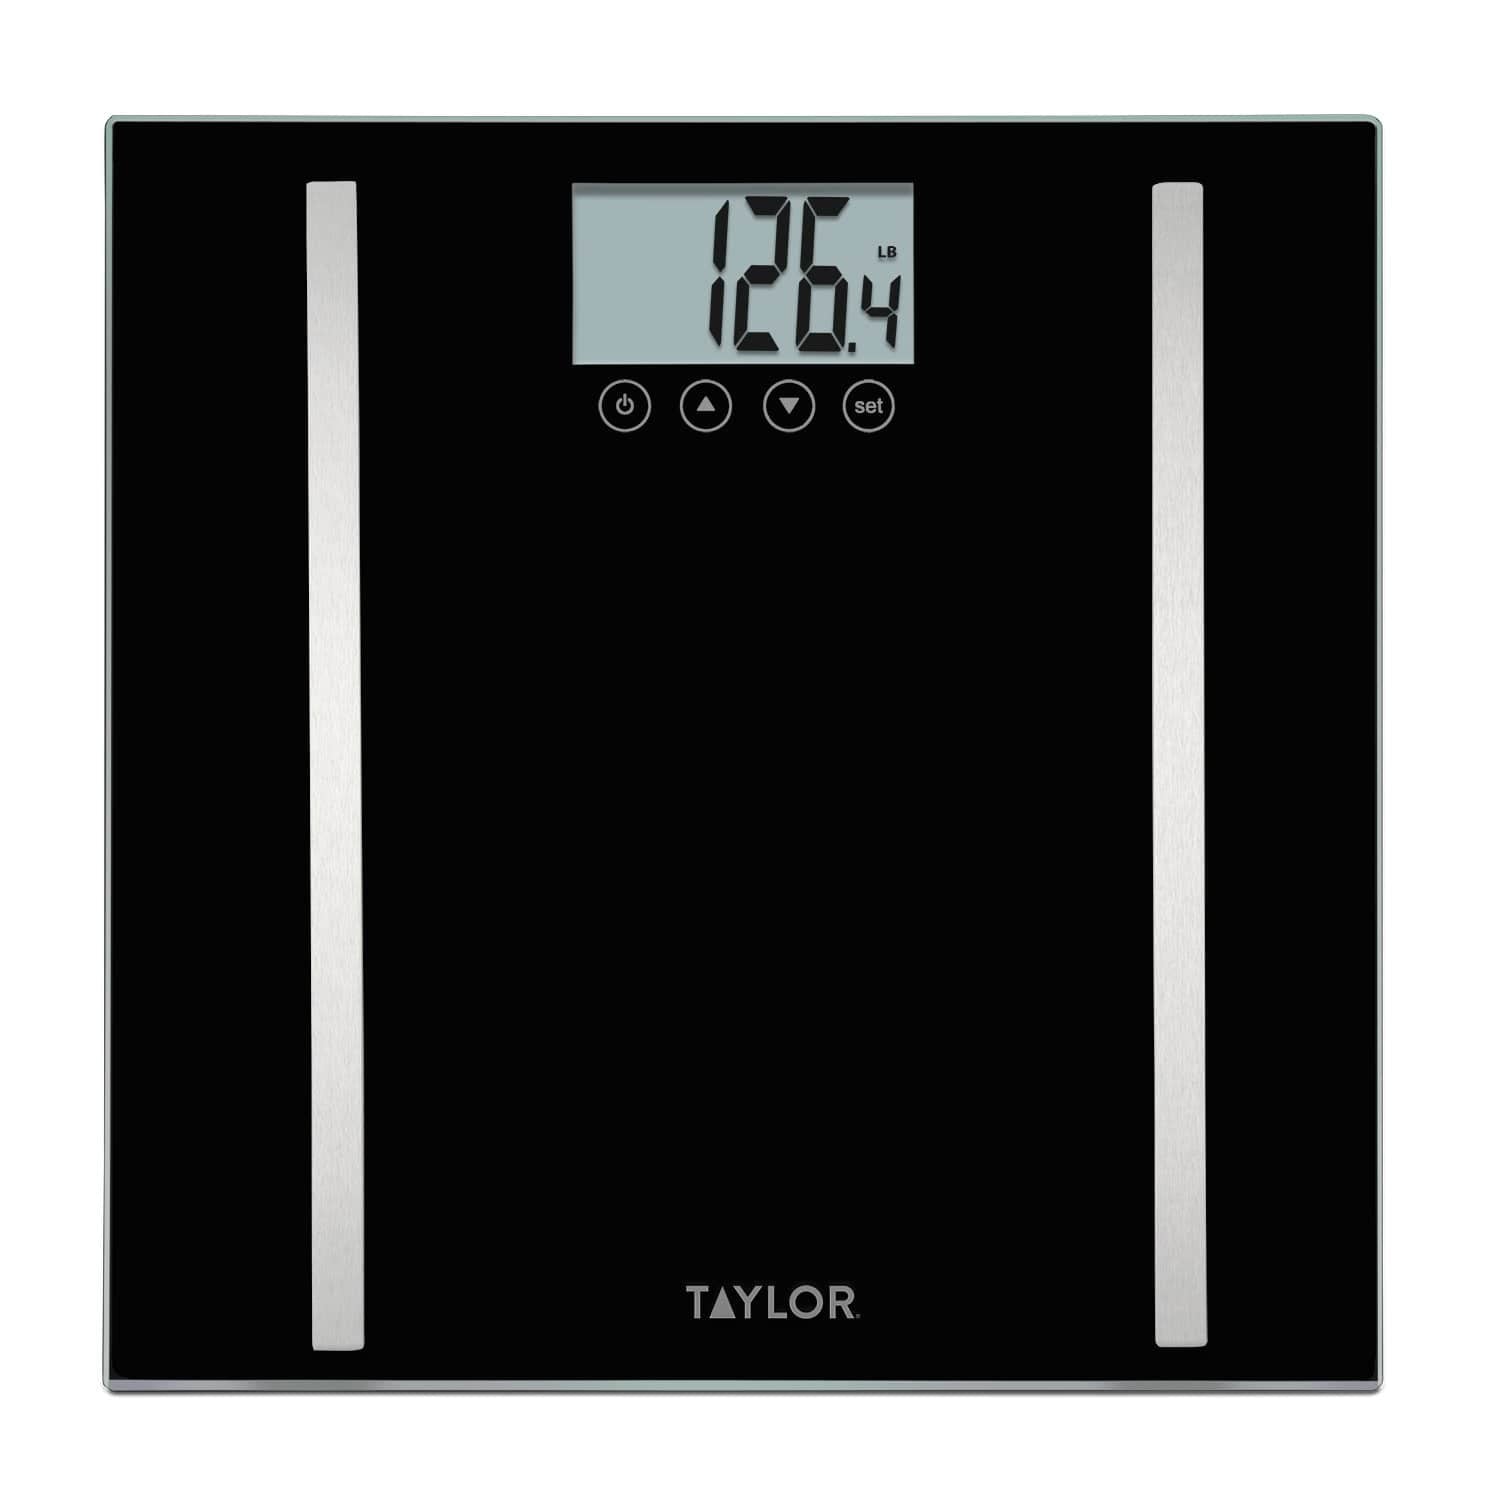 How Accurate Are Your Bathroom Scales? – INEVIFIT